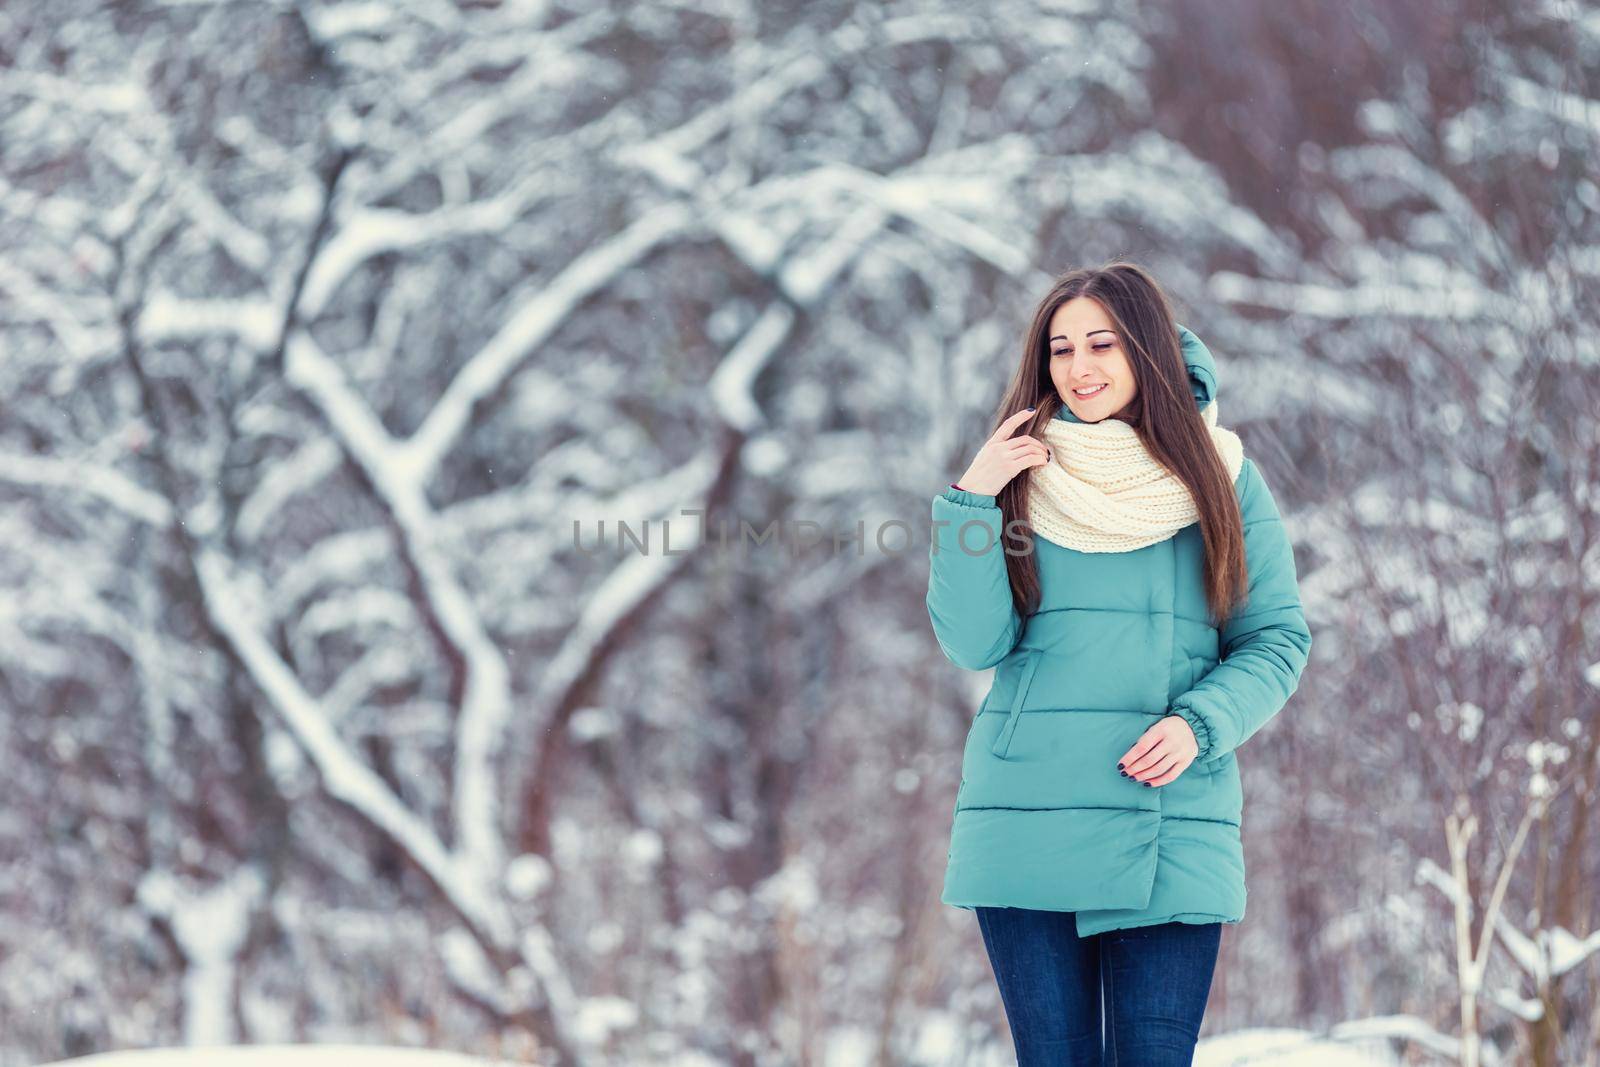 girl in a jacket on the background of snowy trees